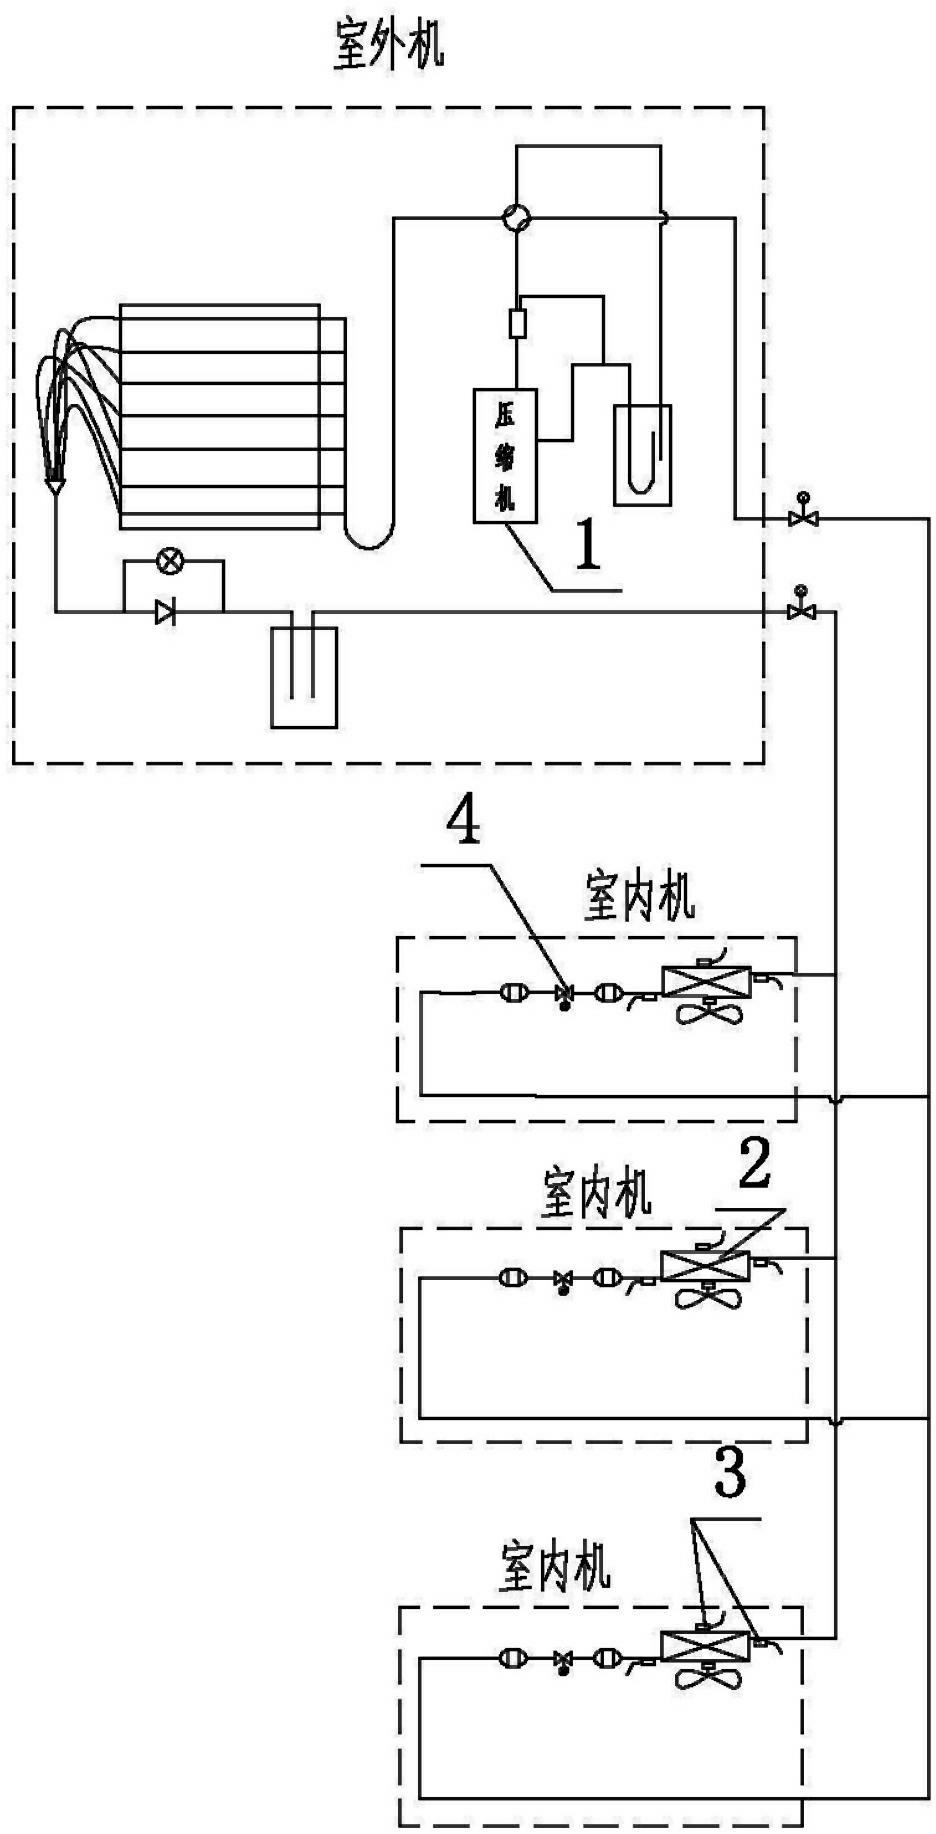 The Control Method of Preventing Refrigerant Drift Flow During